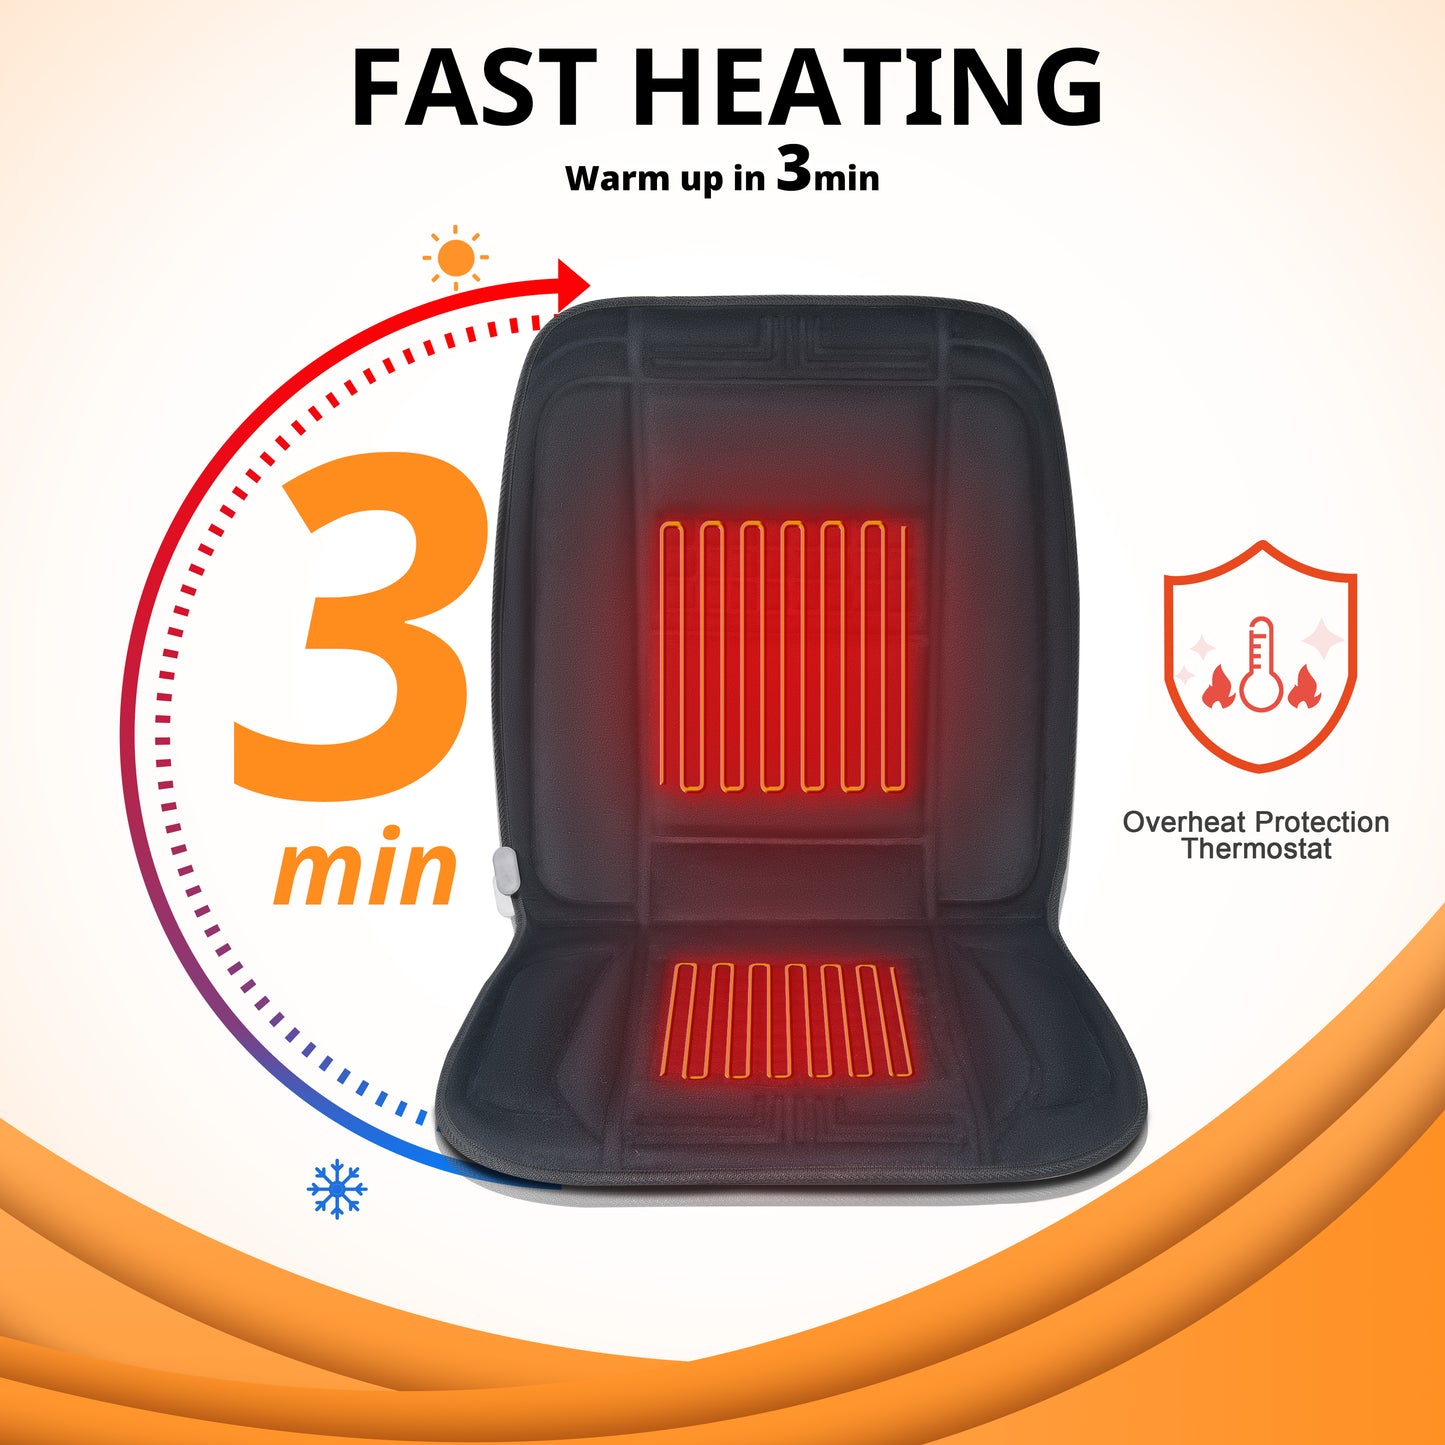 Wide Heated Seat Cover with Fast Heating for Car in the Winter